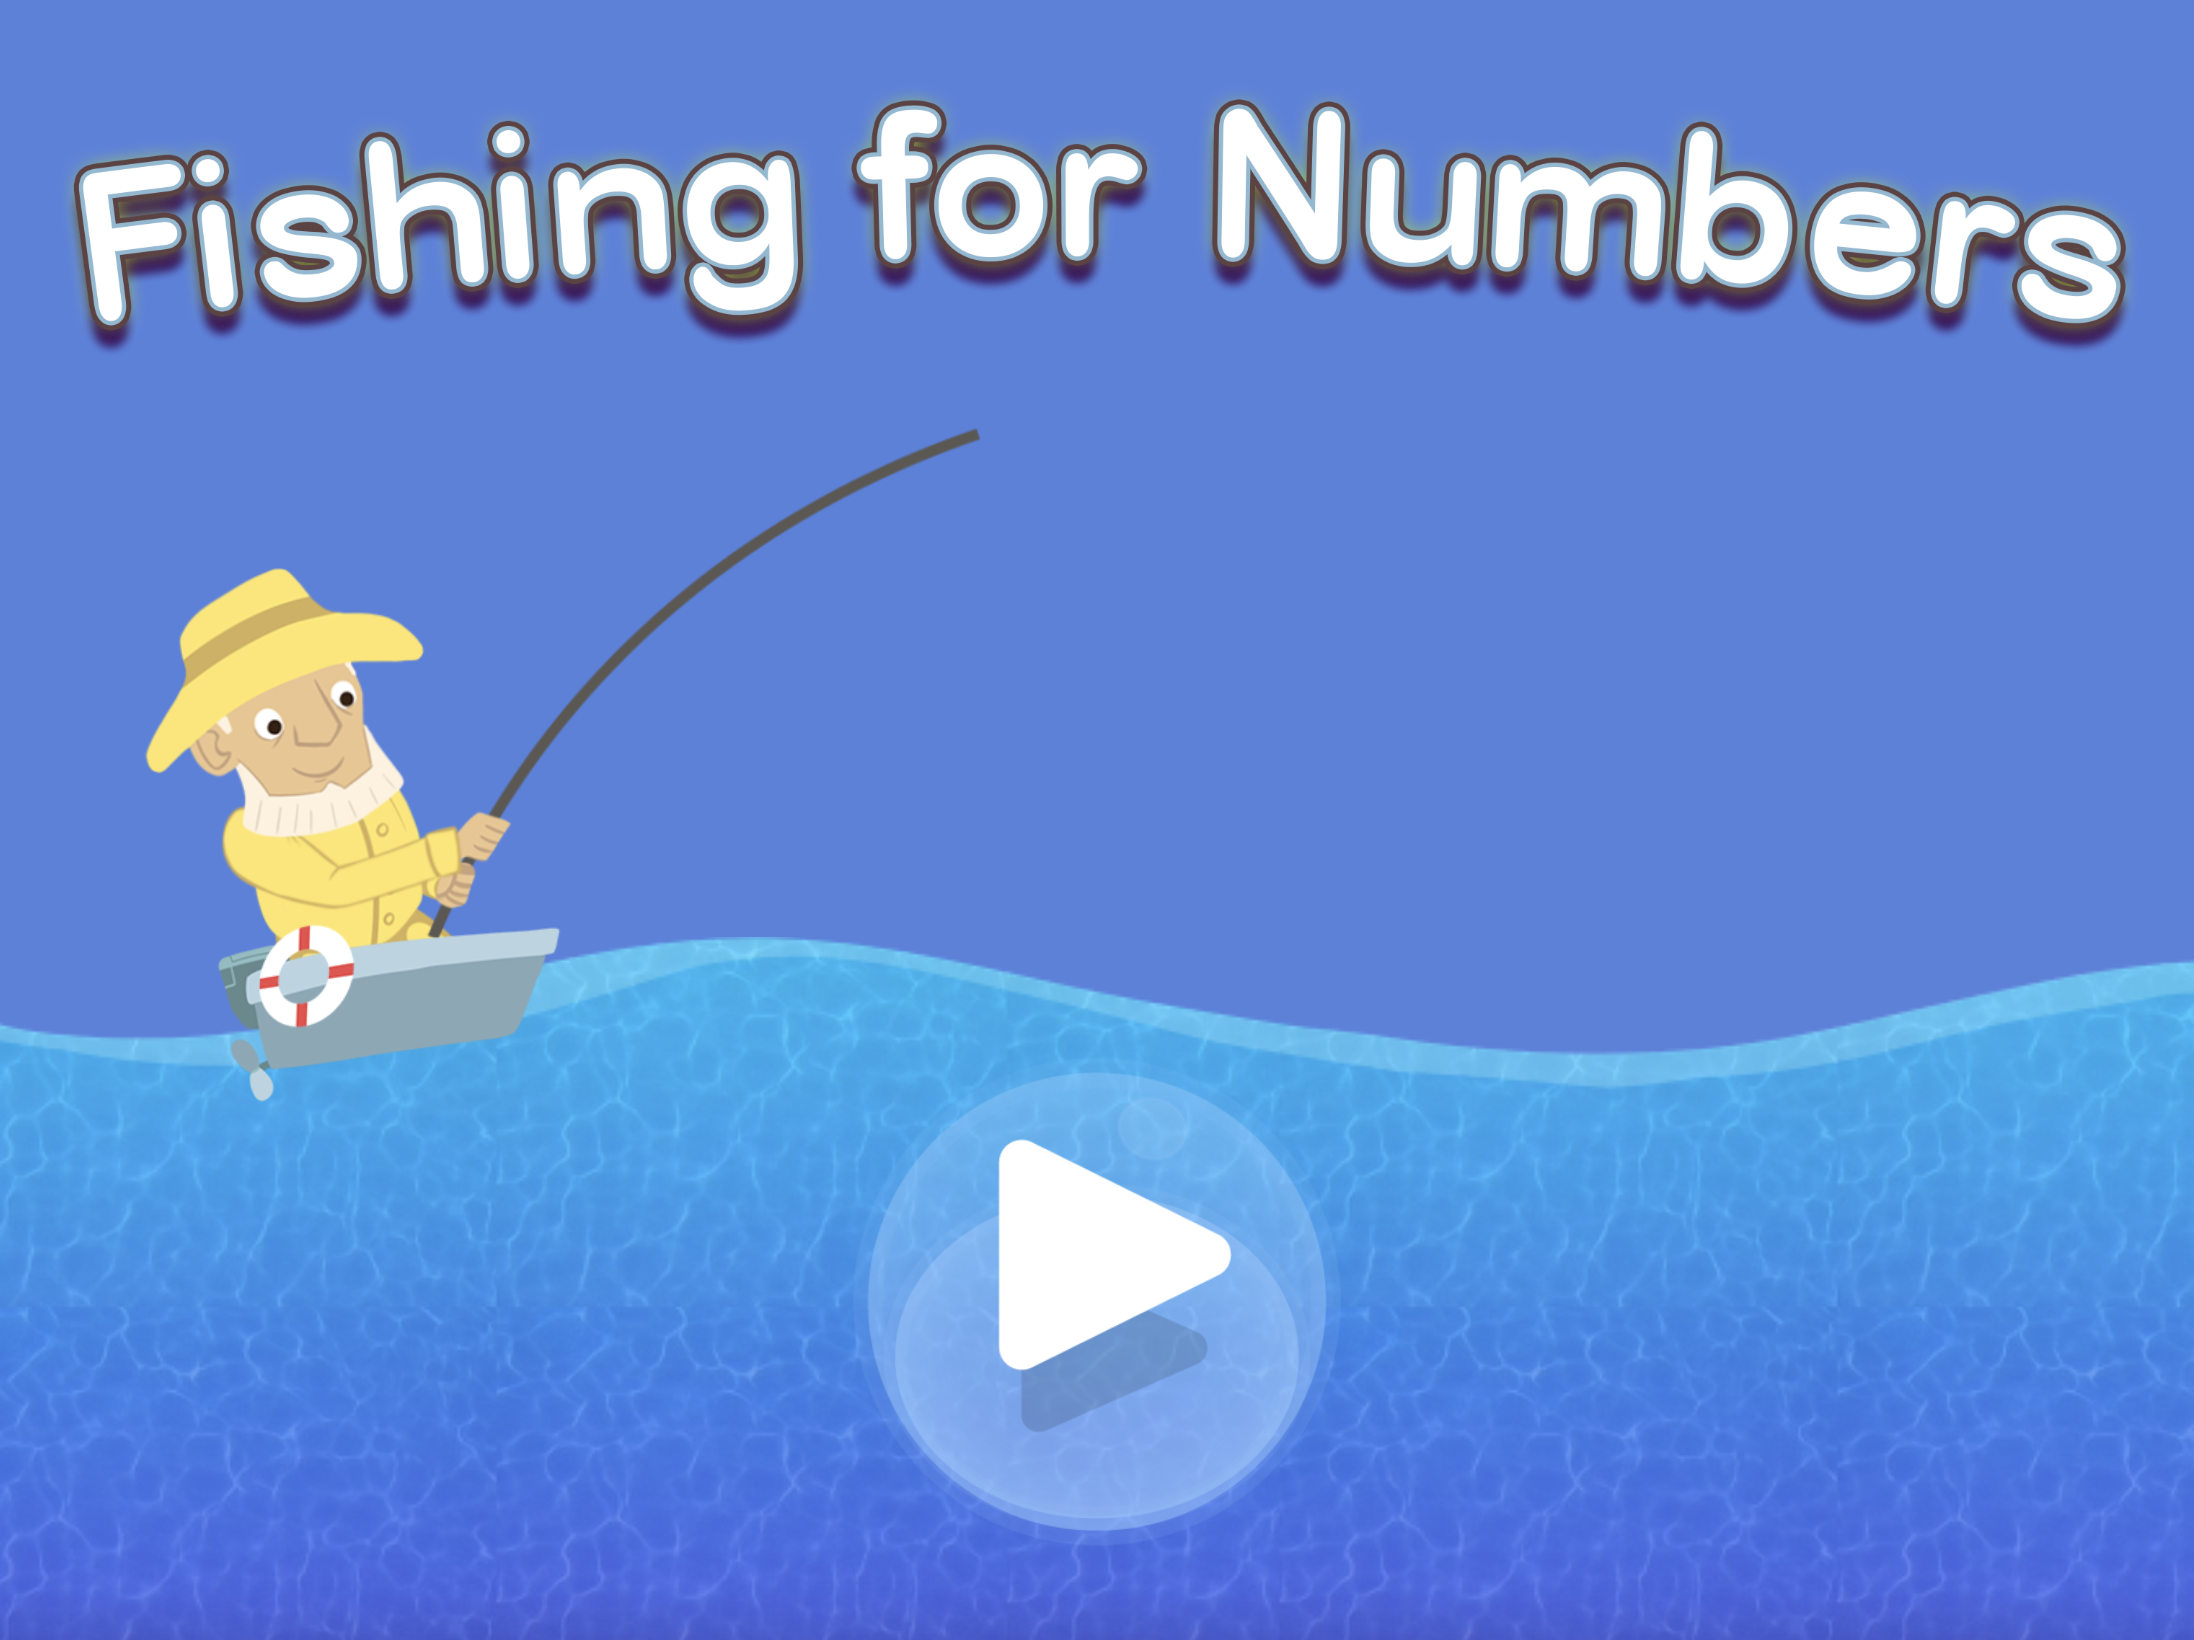 Fishing for Numbers game